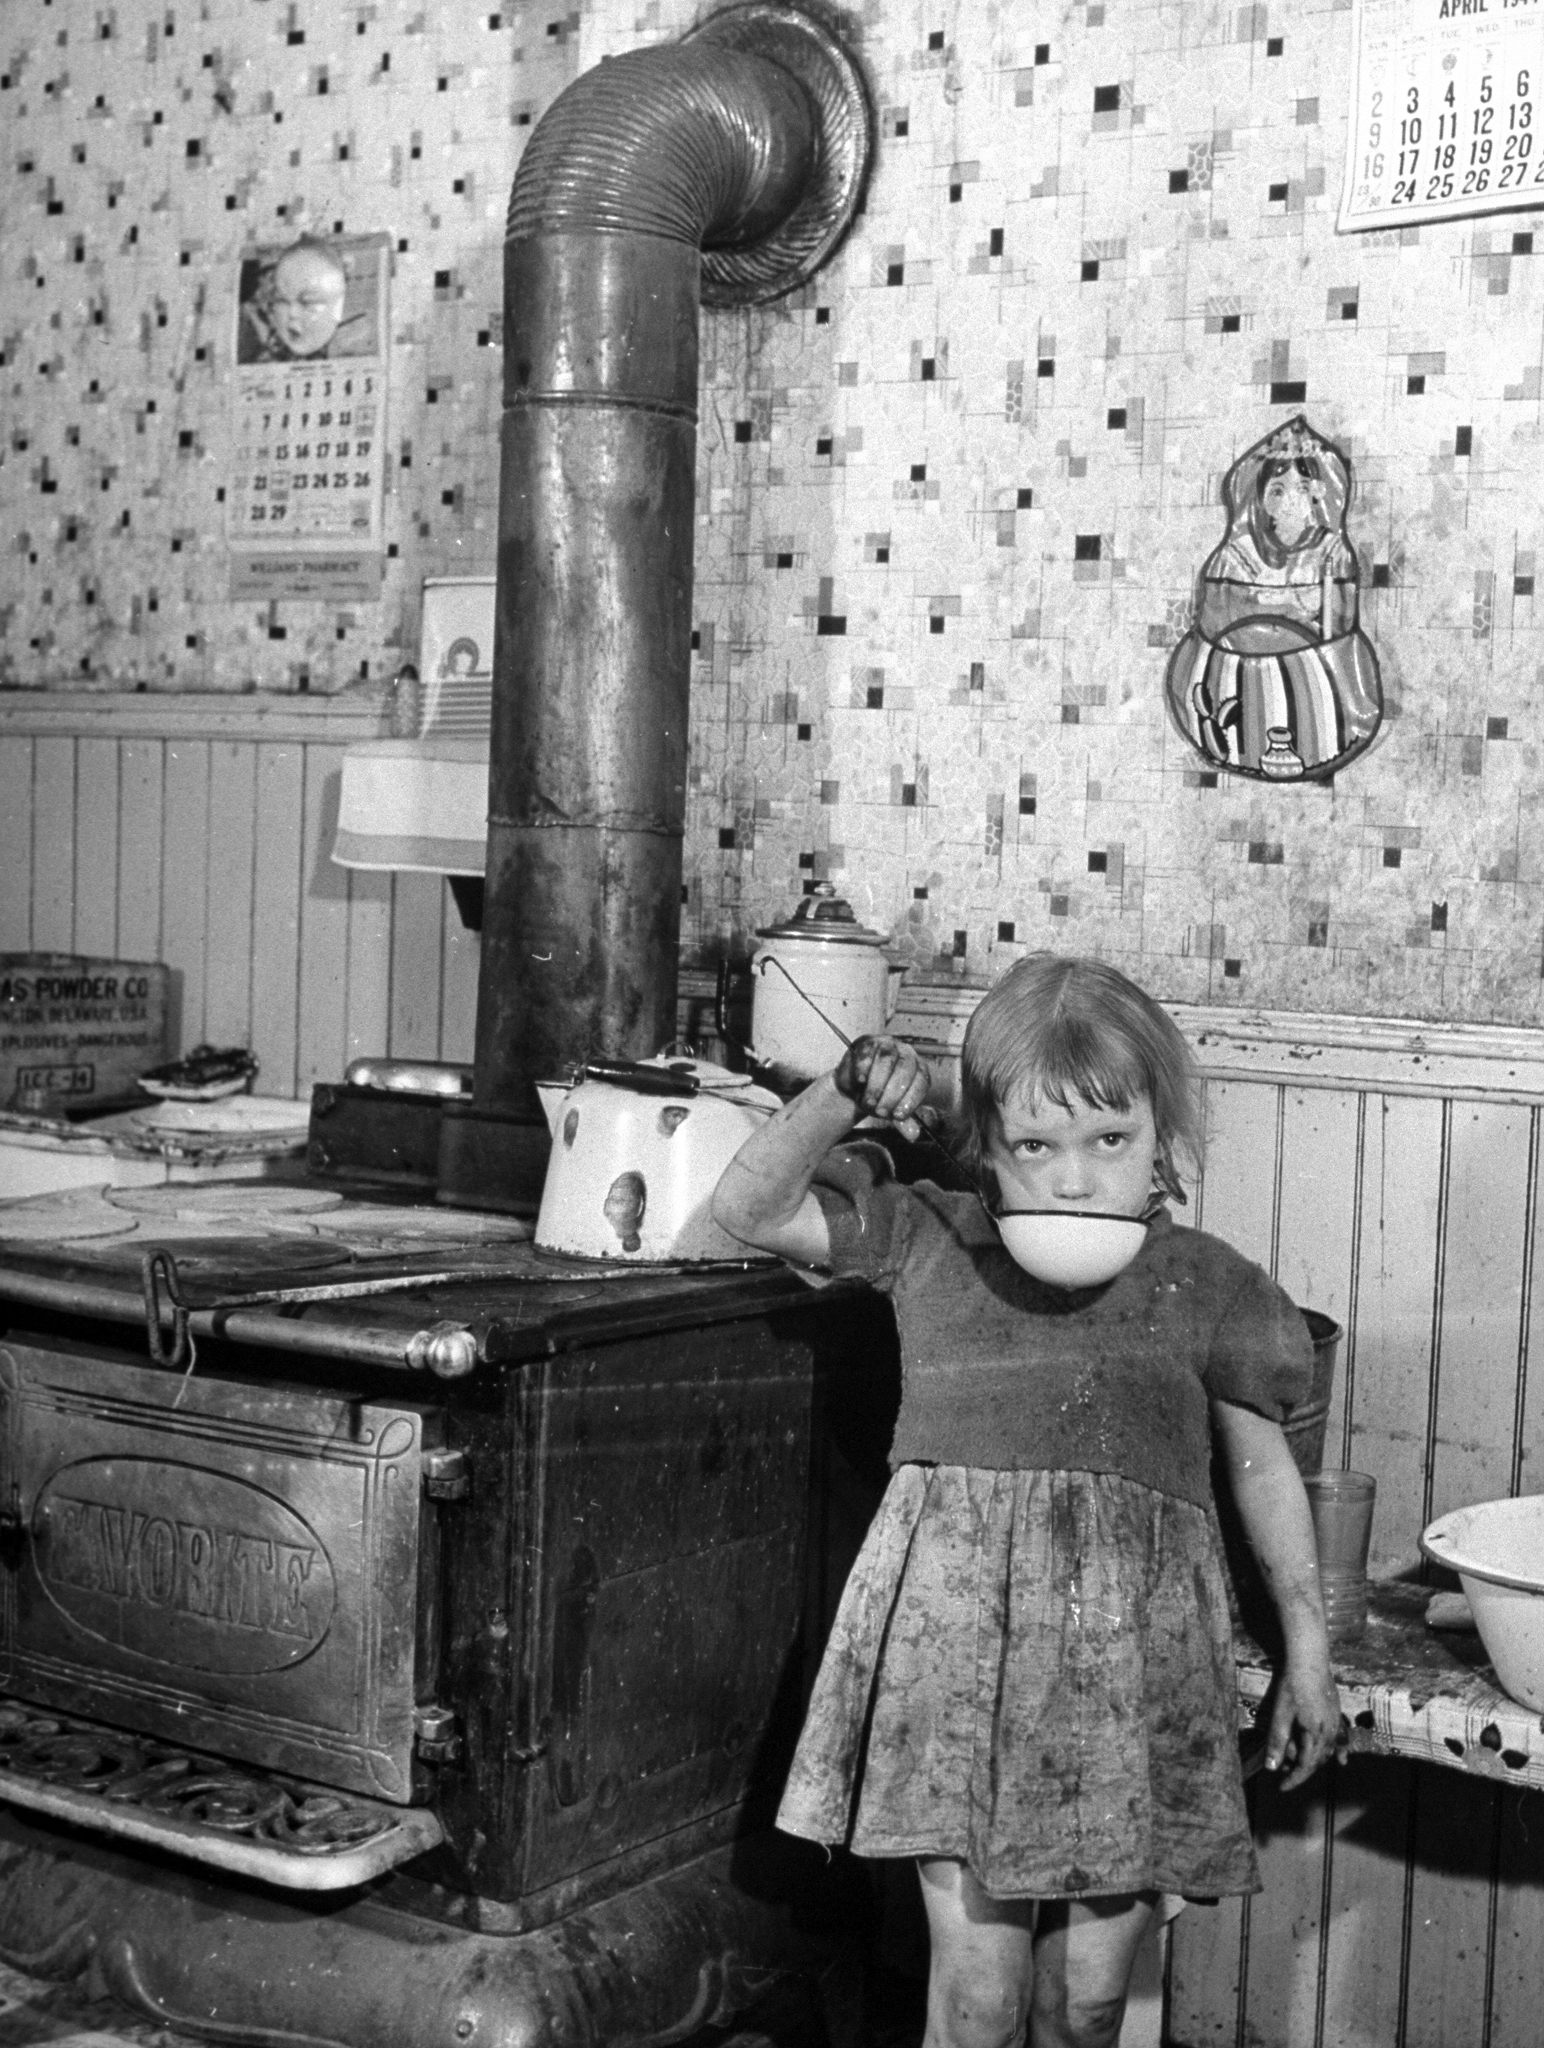 A little girl drinking water in a the dirty kitchen of a steel worker's family in Pittsburgh.